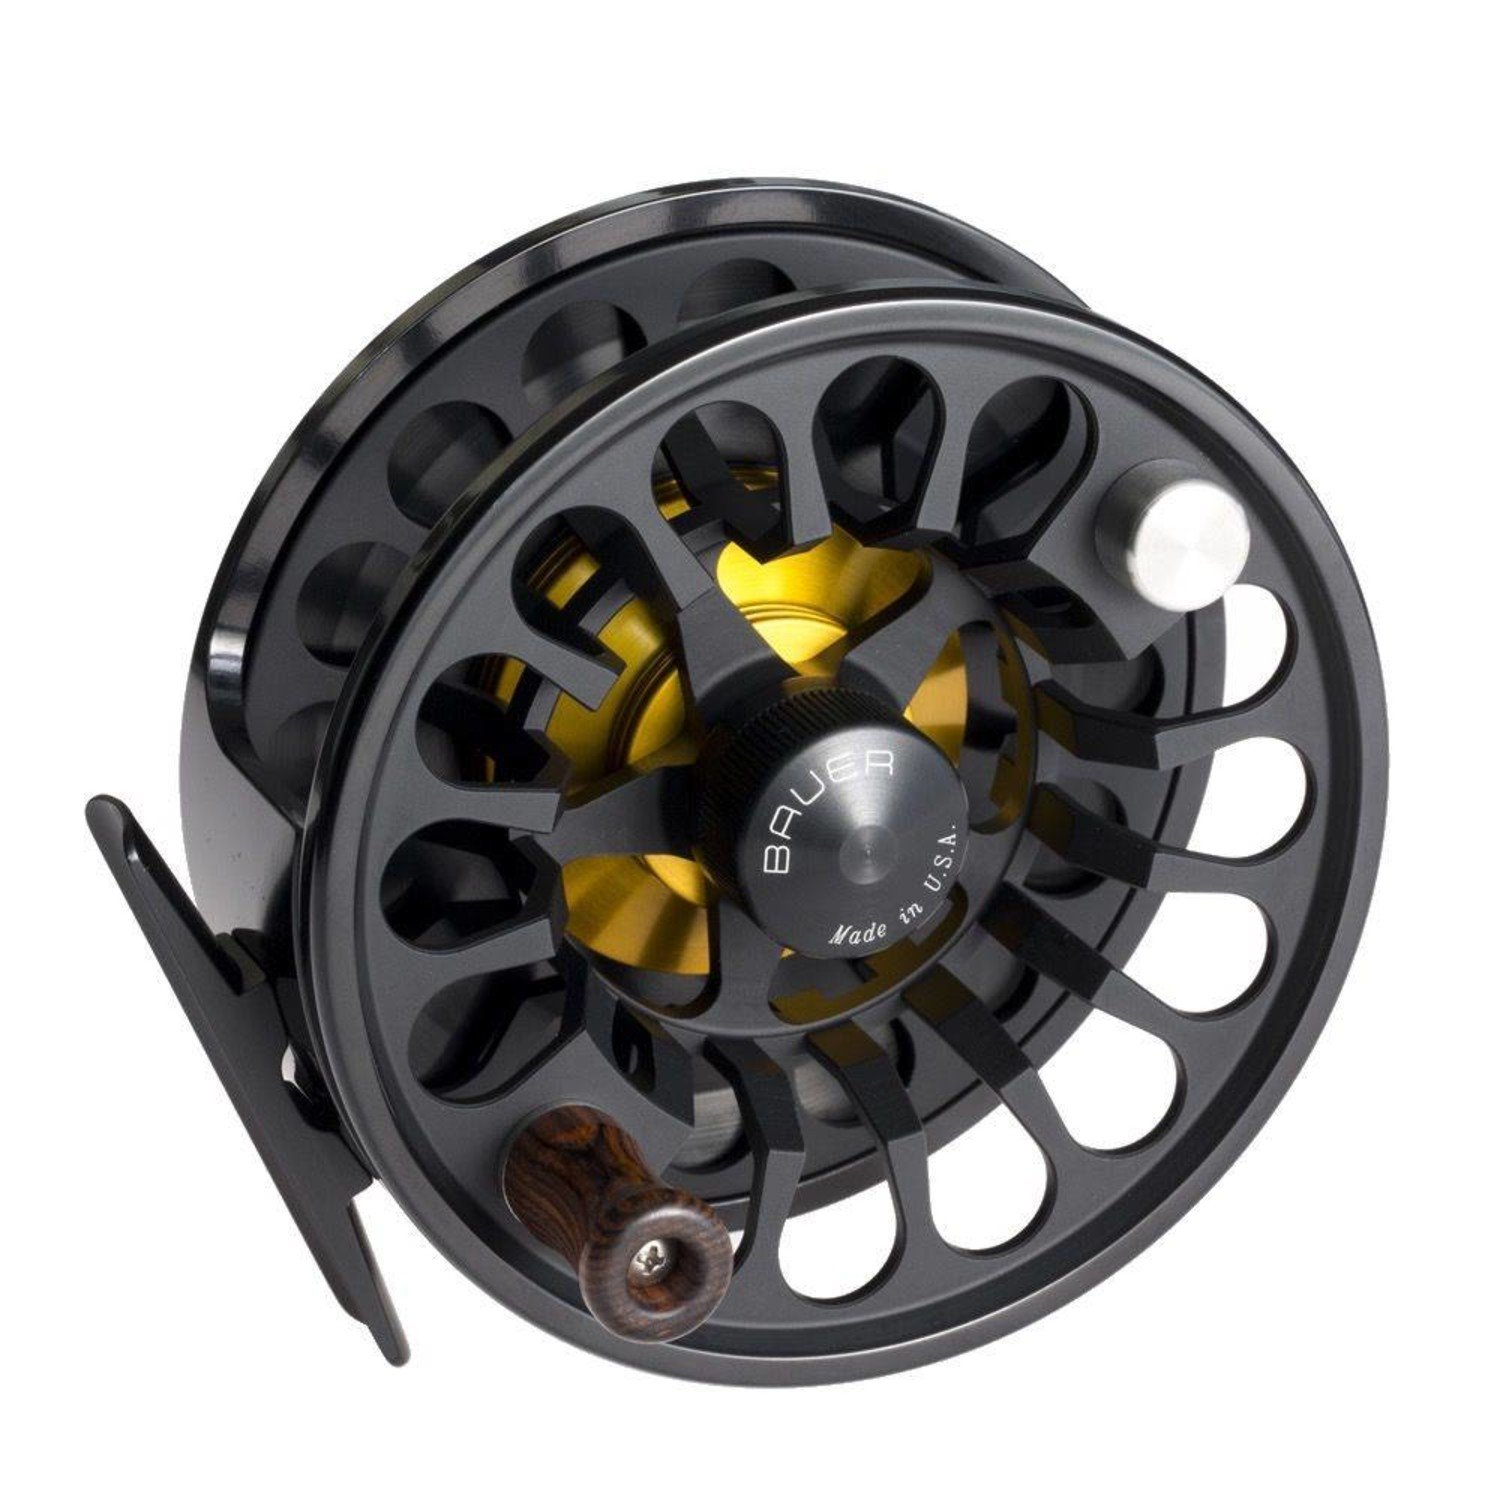 Bauer RX 1 Fly Reel - Black / Charcoal - NEW - FREE FLY LINE